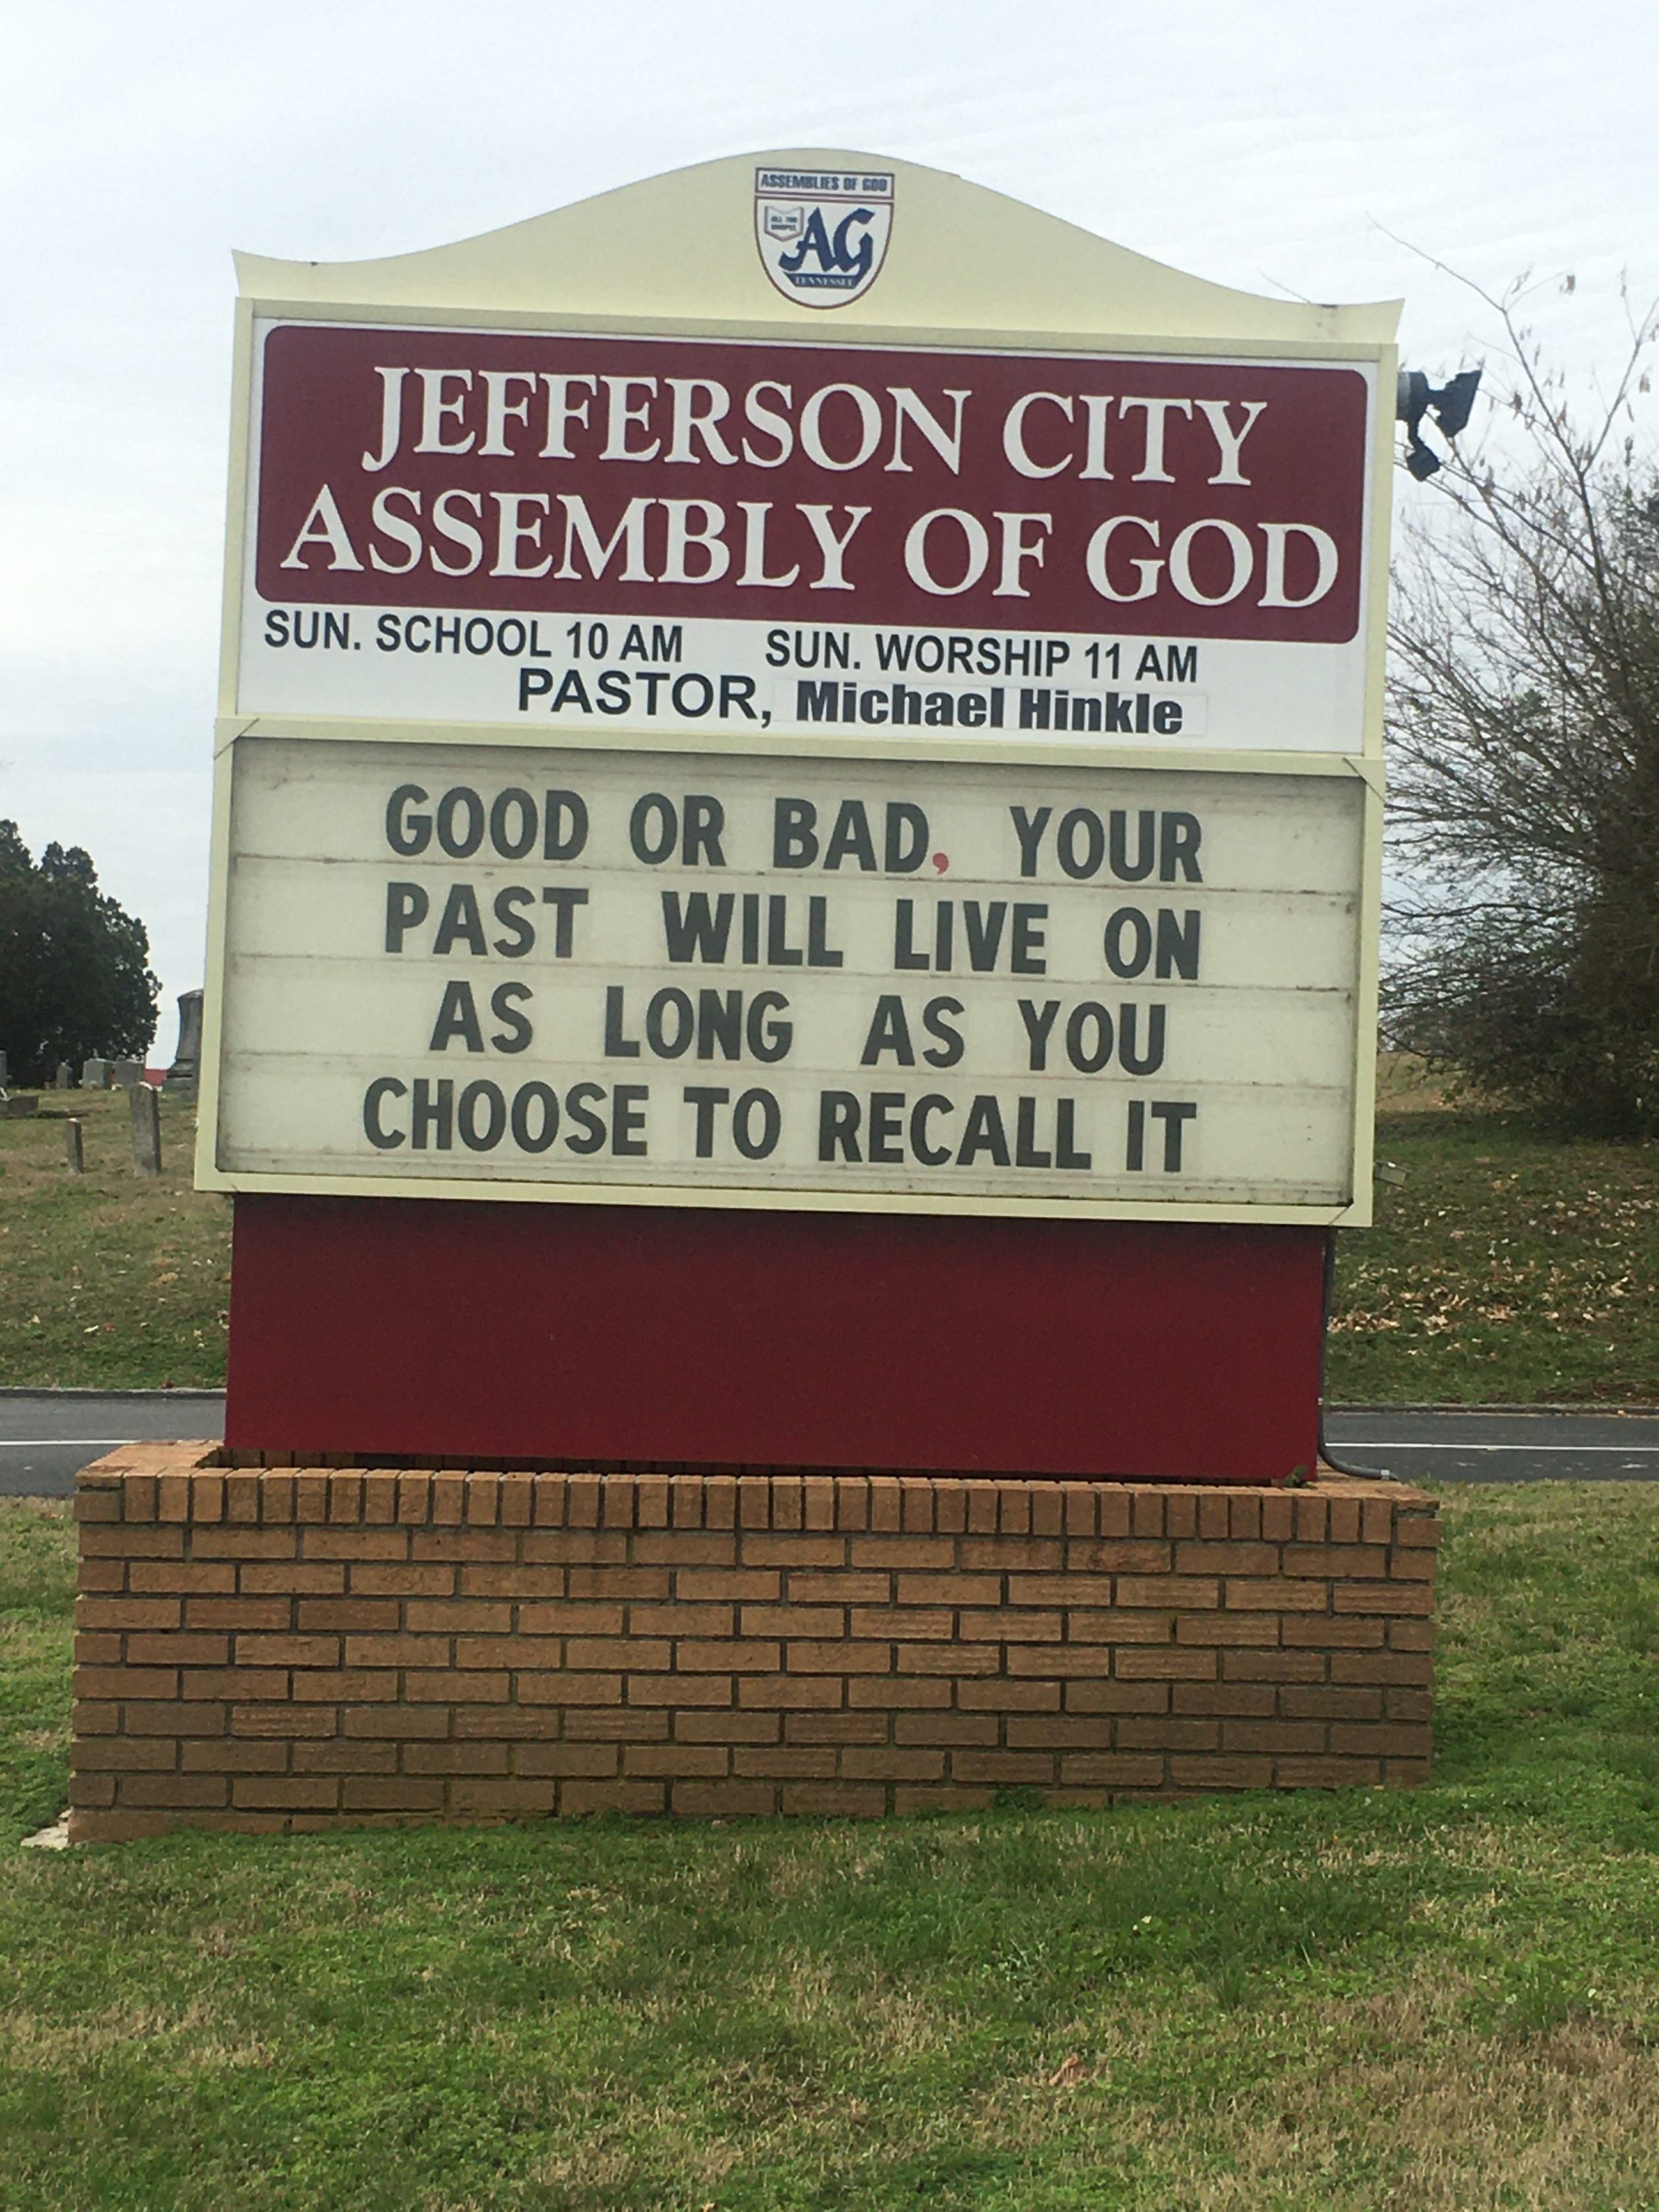 Your Past Will Live On Church Sign from Jefferson City Assembly of God is this week’s Church Sign Saturday. 